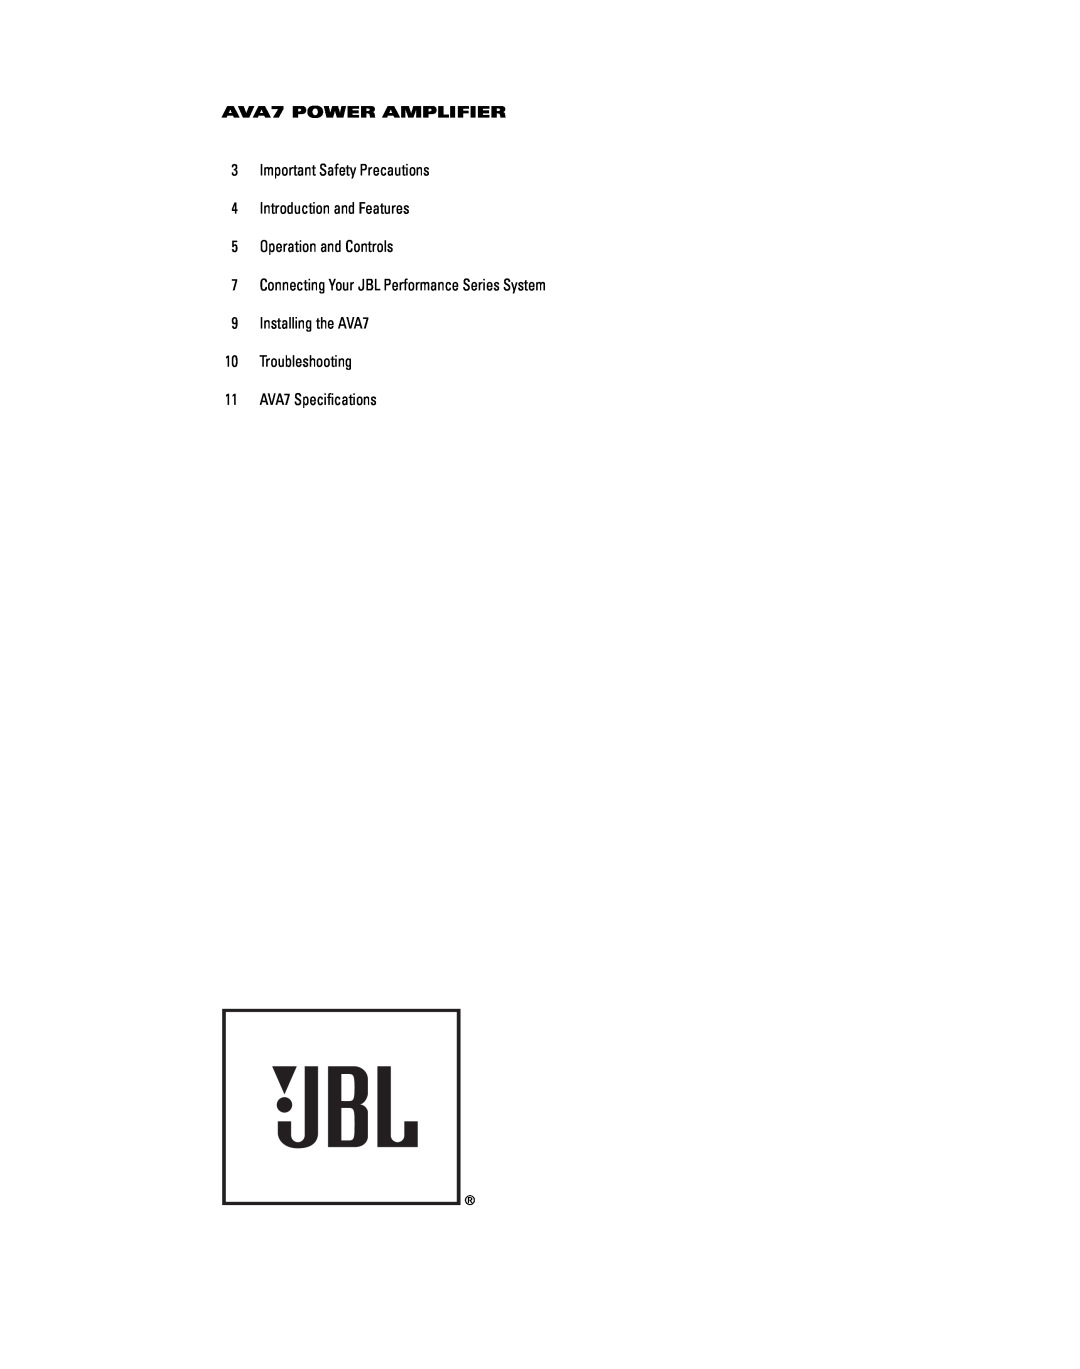 JBL manual AVA7 POWER AMPLIFIER, 3Important Safety Precautions, 4Introduction and Features, 5Operation and Controls 